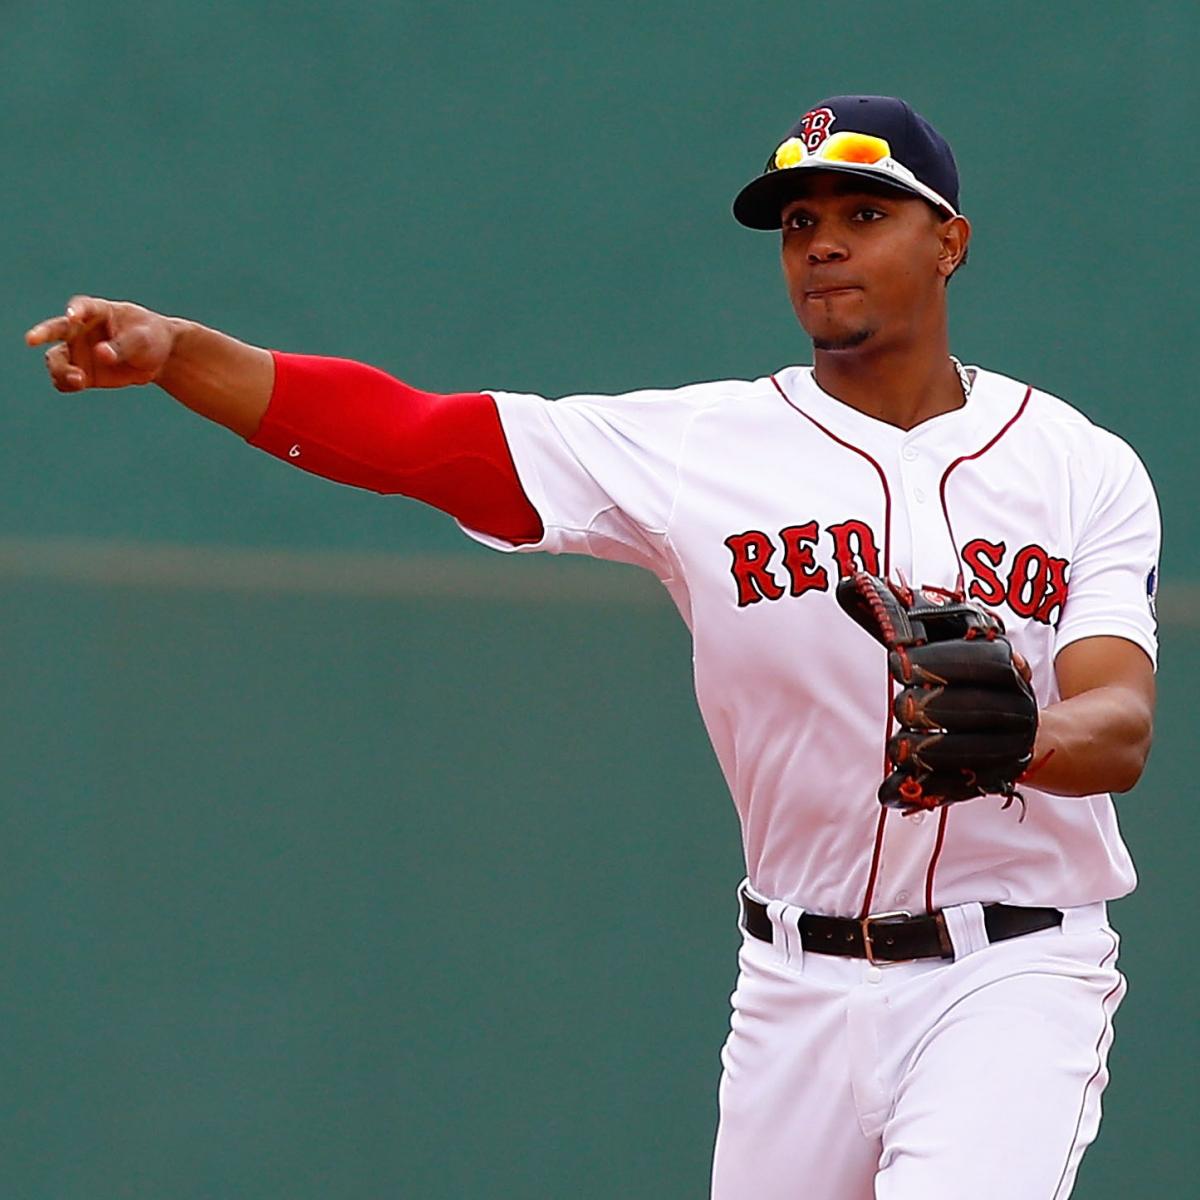 Xander Bogaerts of the Boston Red Sox looks on before a game